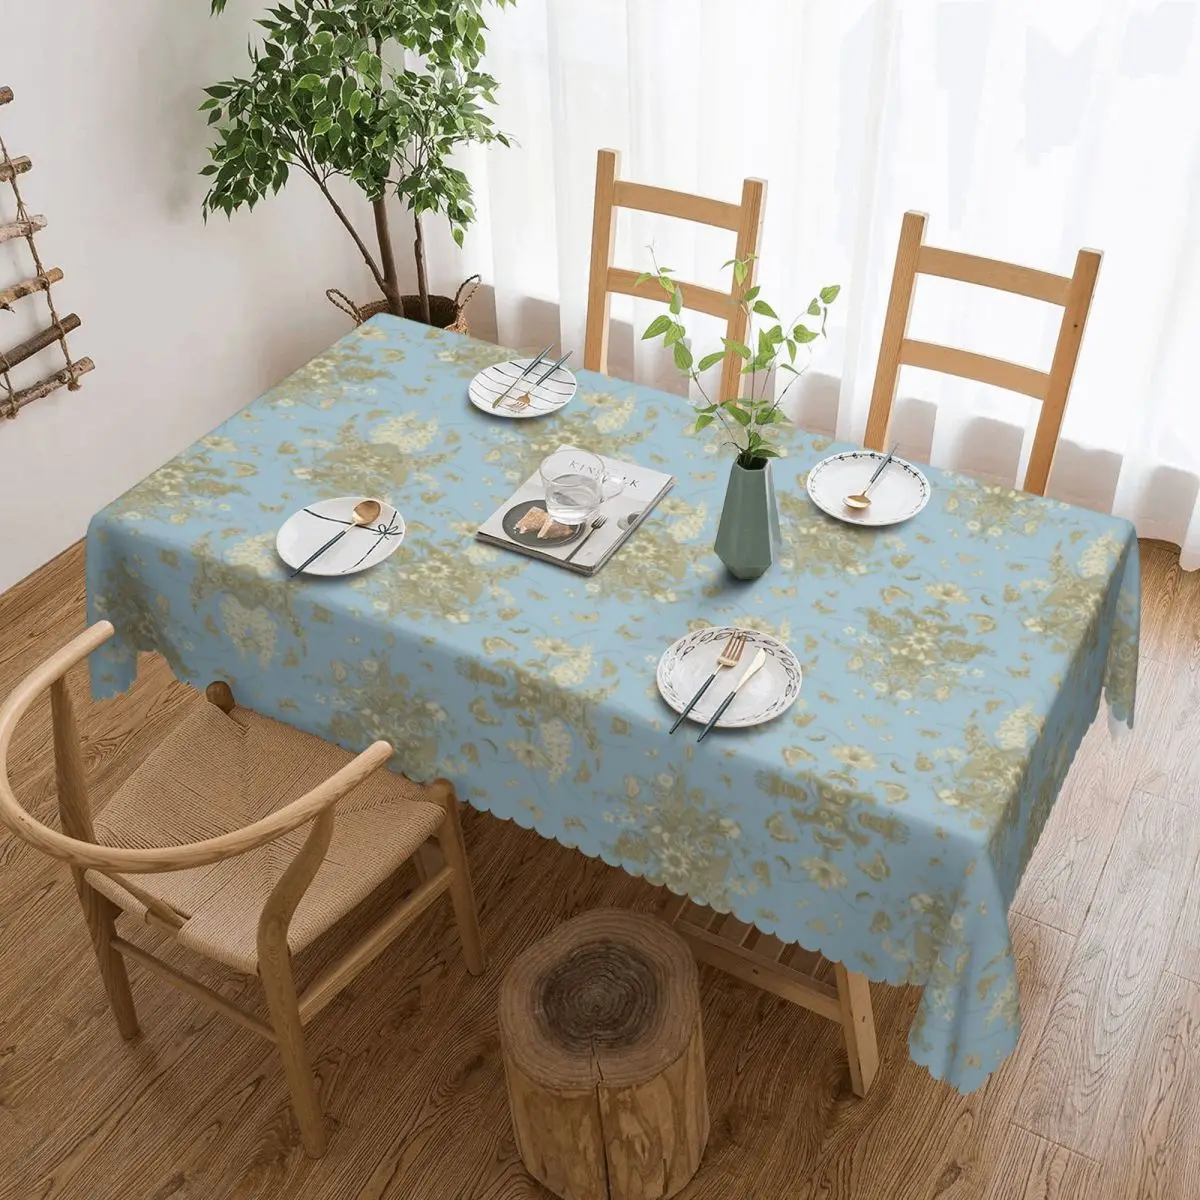 

Rectangular Waterproof Oil-Proof Blue Gold Flower Toile De Jouy Tablecloth Table Covers Inspired Botanic Pattern Table Cloth